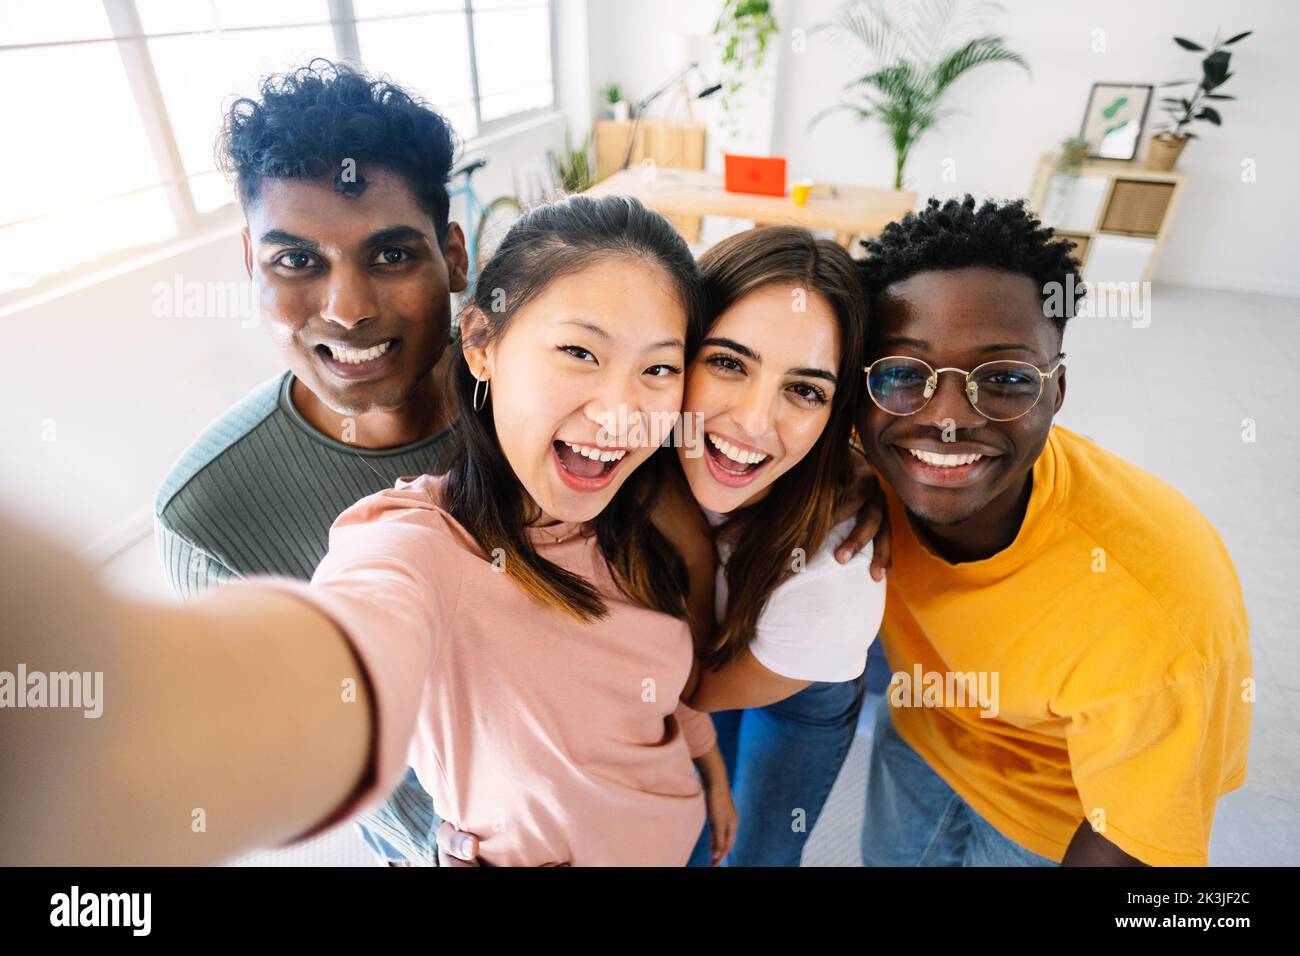 Selfie portrait of young creative teenager student friends having fun together Stock Photo